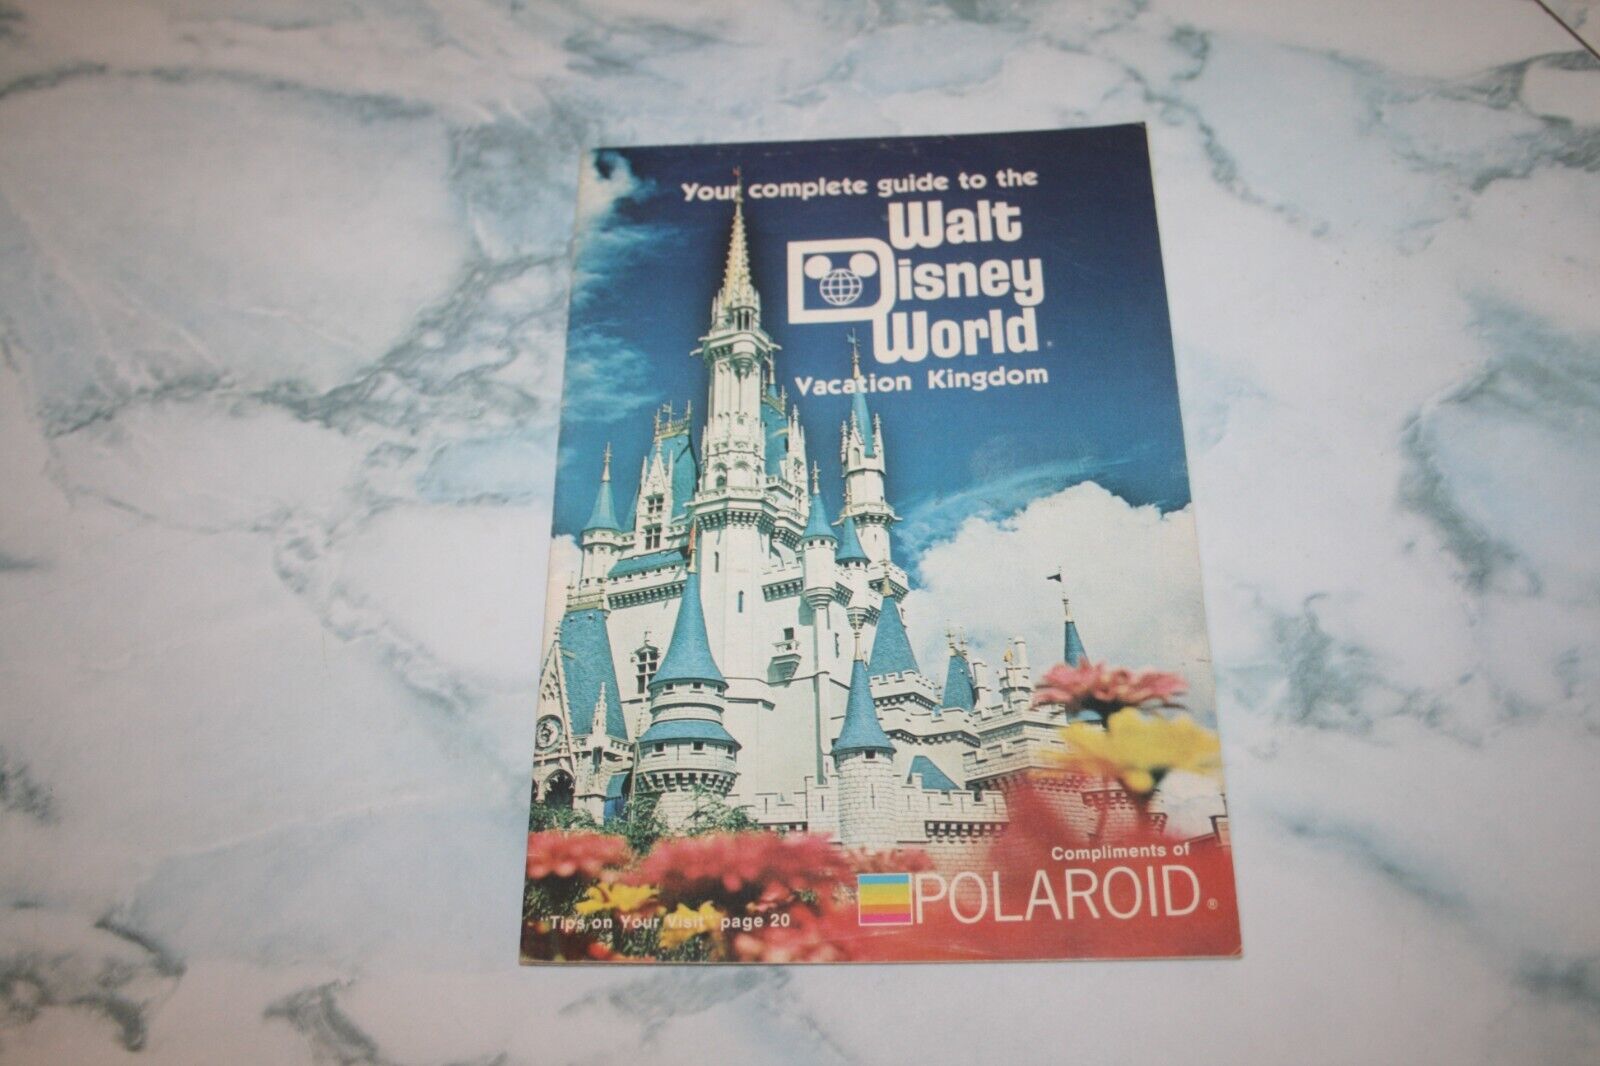 Vintage 1979 Disney World Vacation Kingdom Guide Compliments of Polaroid